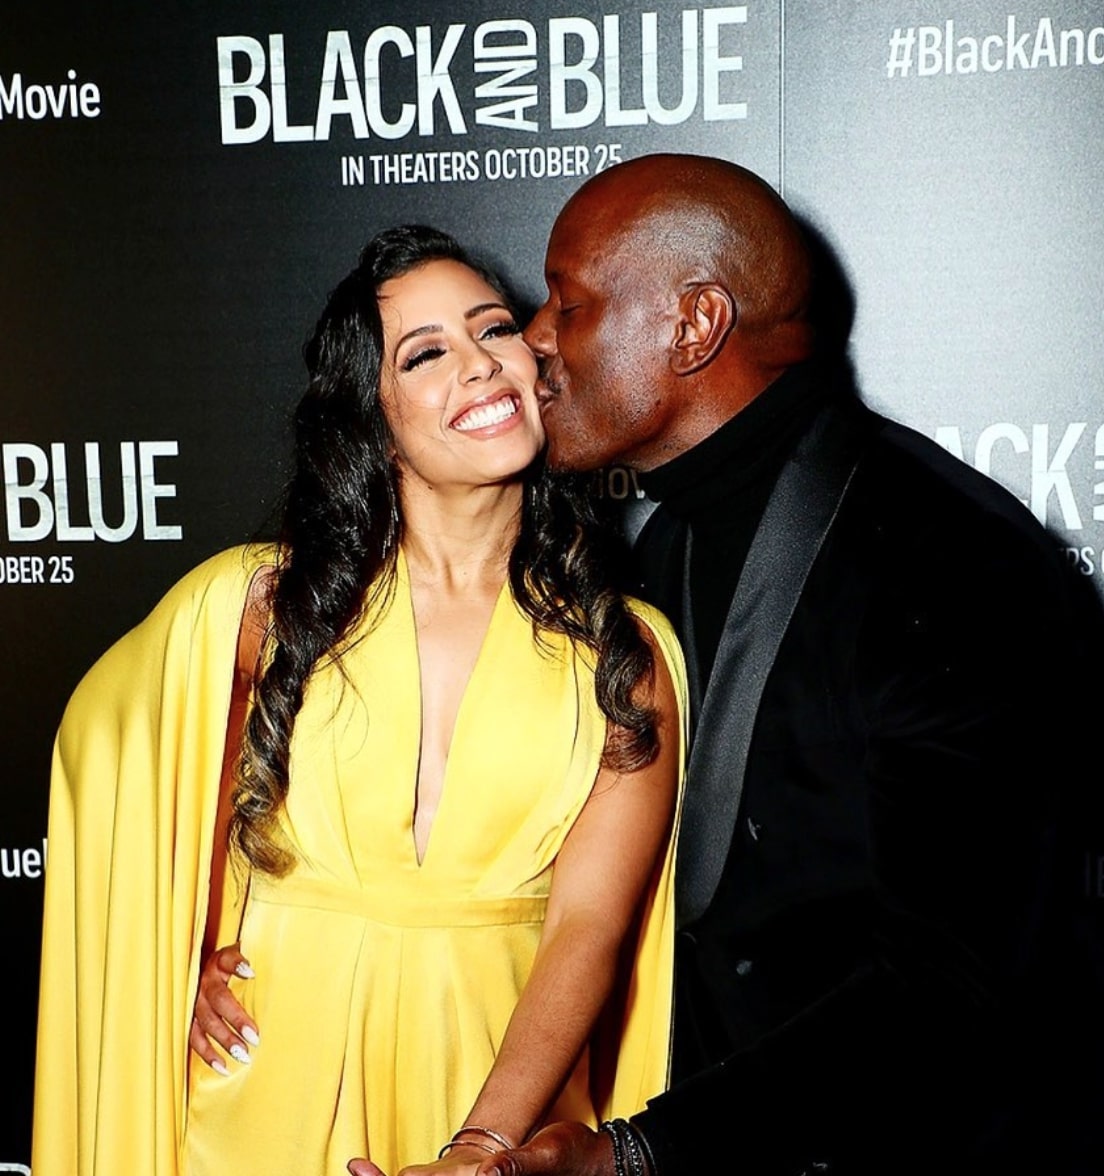 tyrese gibson says he 'thinks' he'll win back estranged wife